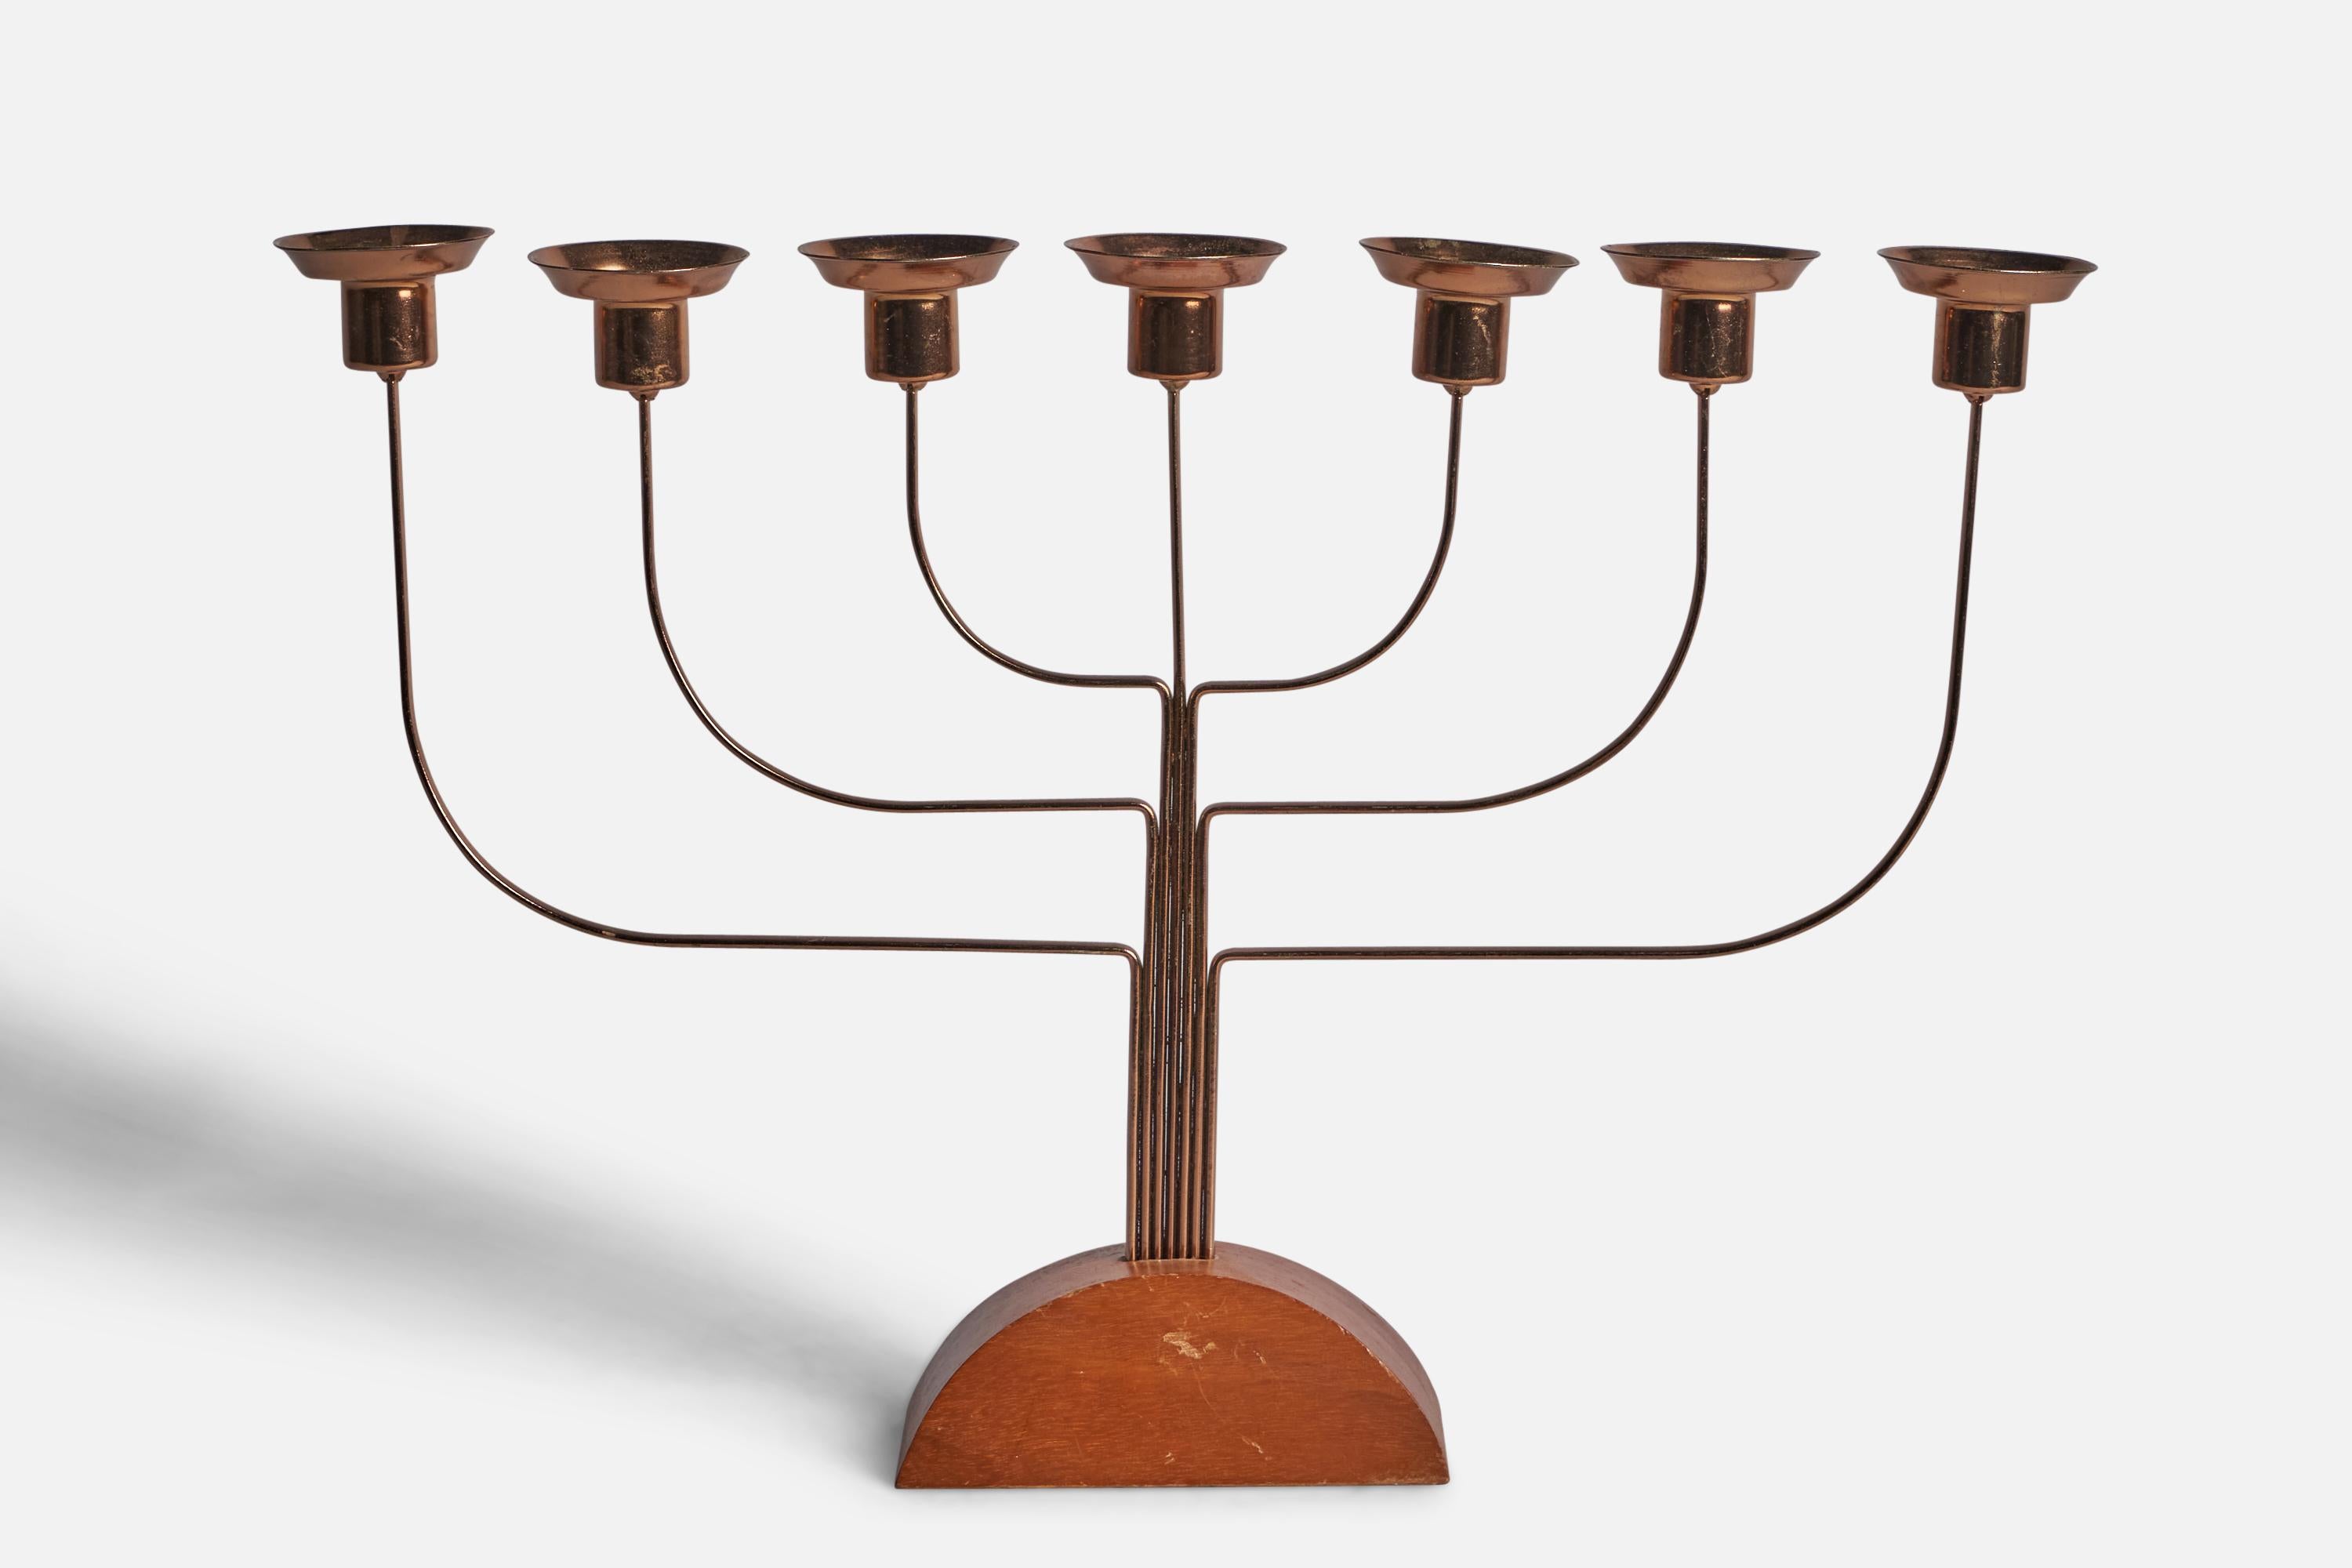 A copper and elm candelabra designed and produced in Sweden, 1940s.

Hold 0.65” diameter candles